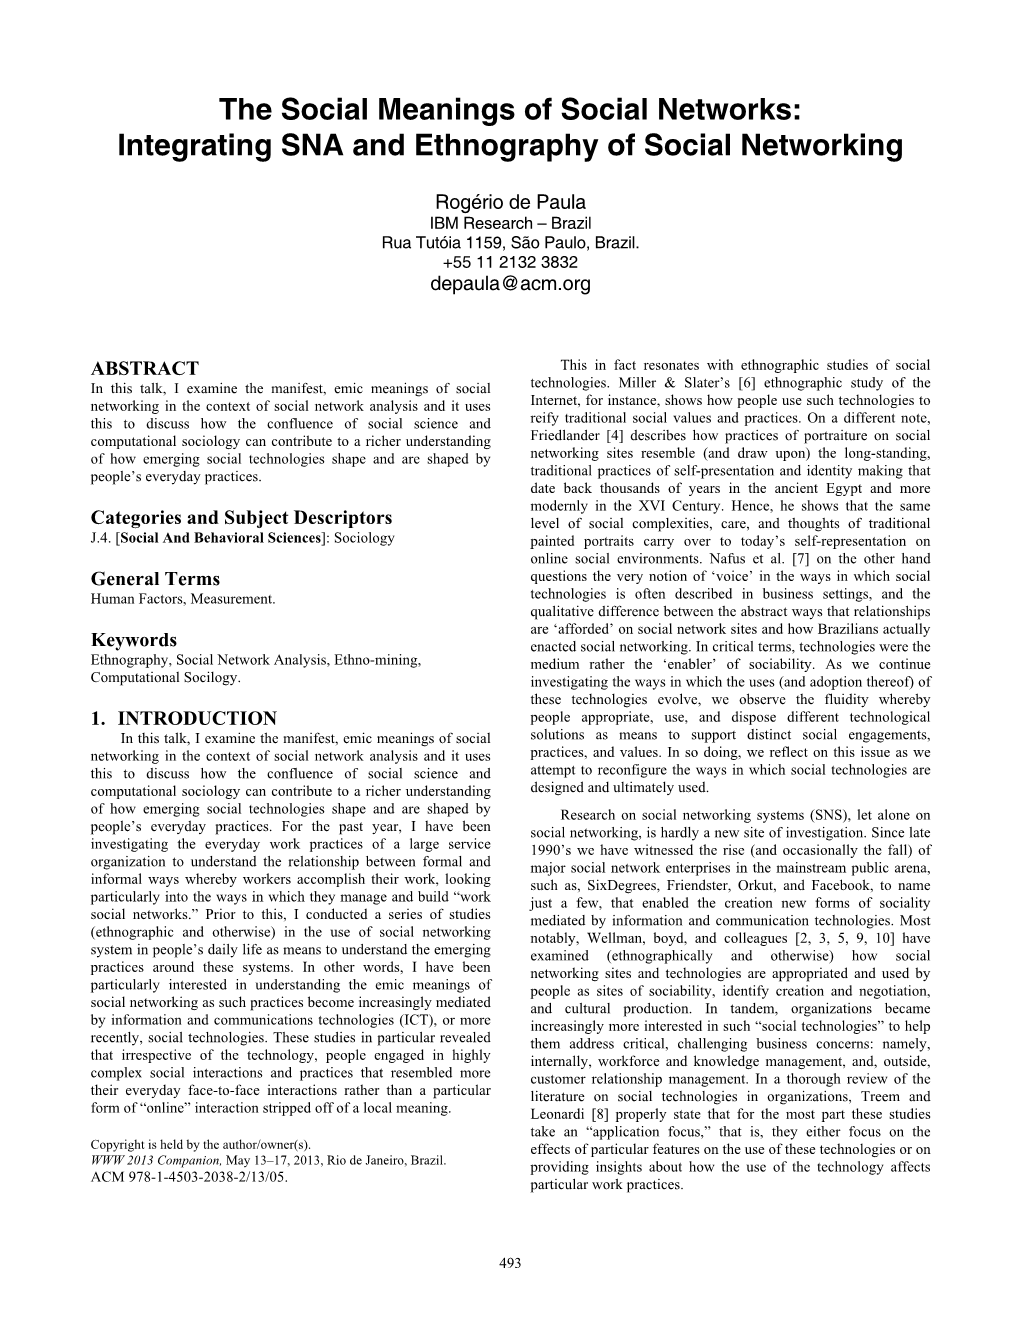 The Social Meanings of Social Networks: Integrating SNA and Ethnography of Social Networking